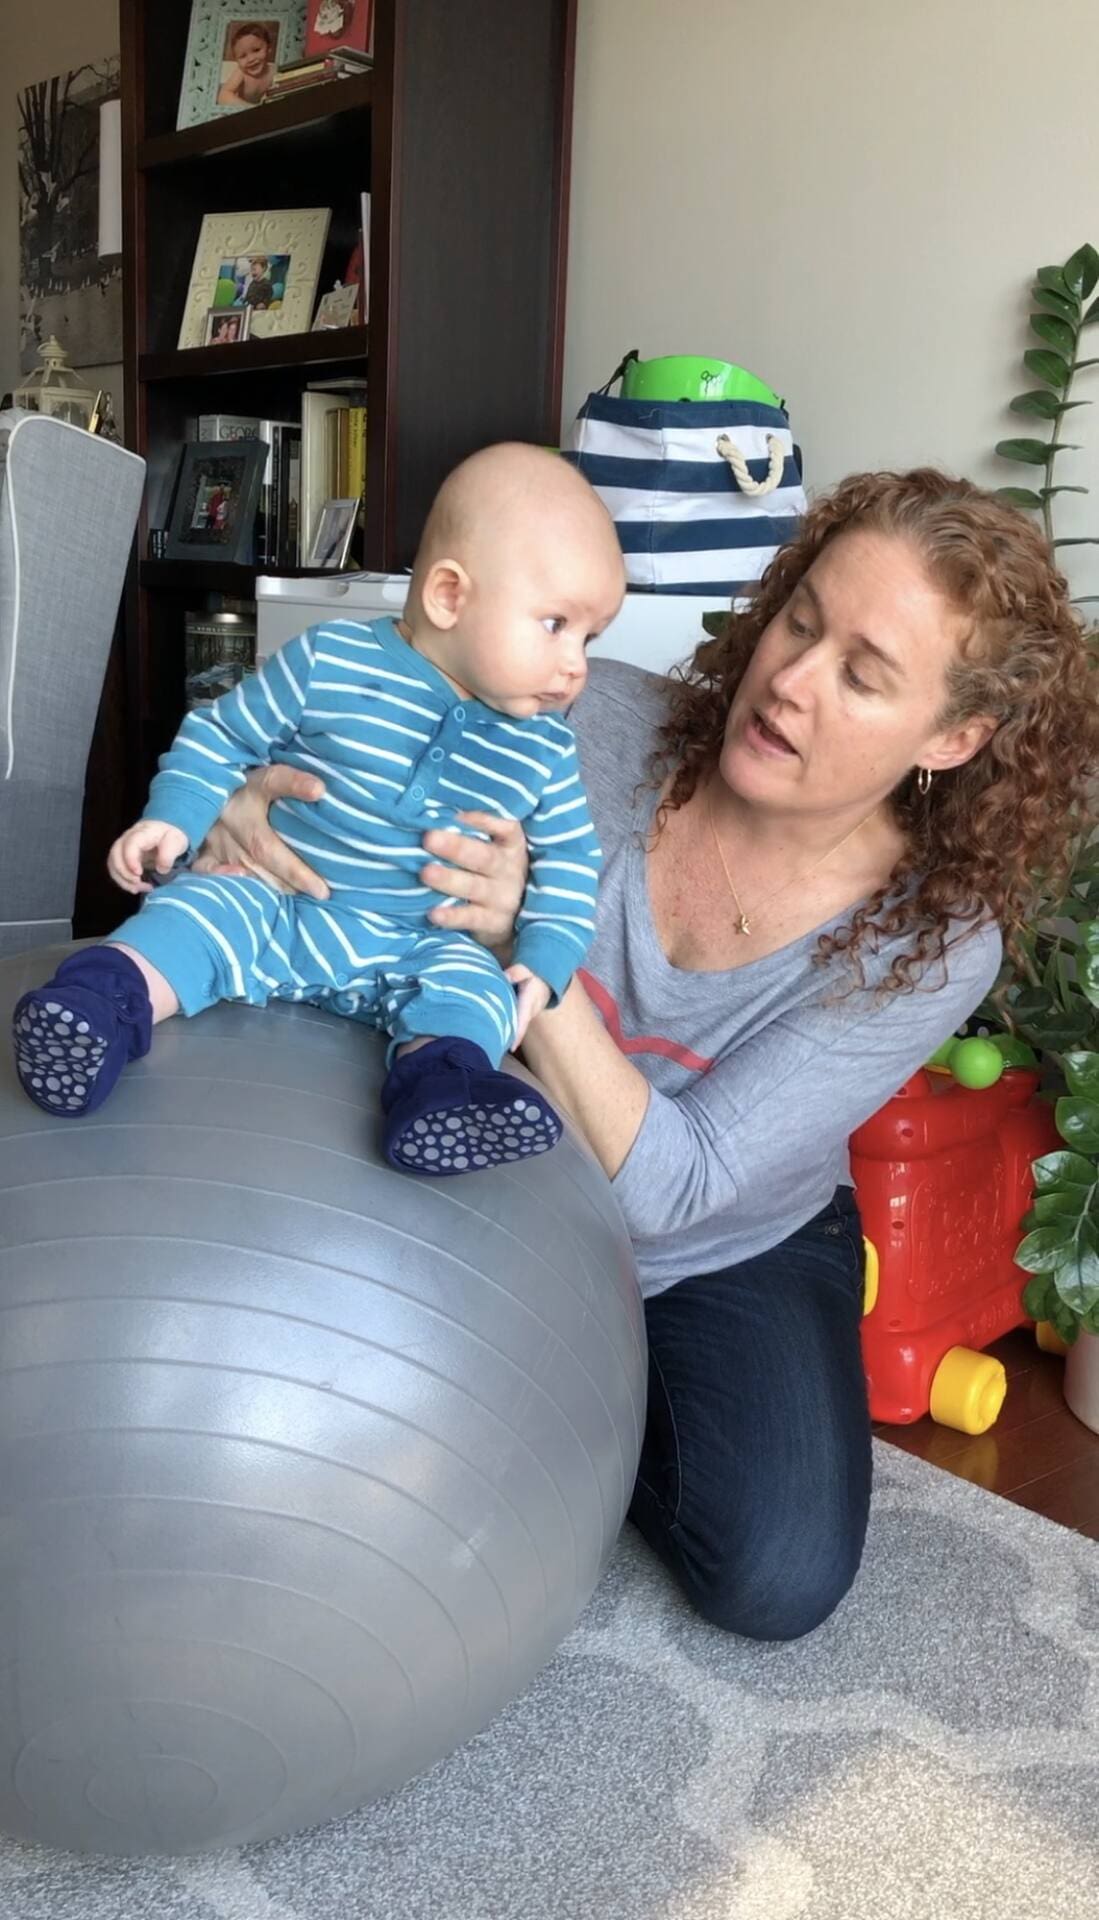 activities with therapy ball